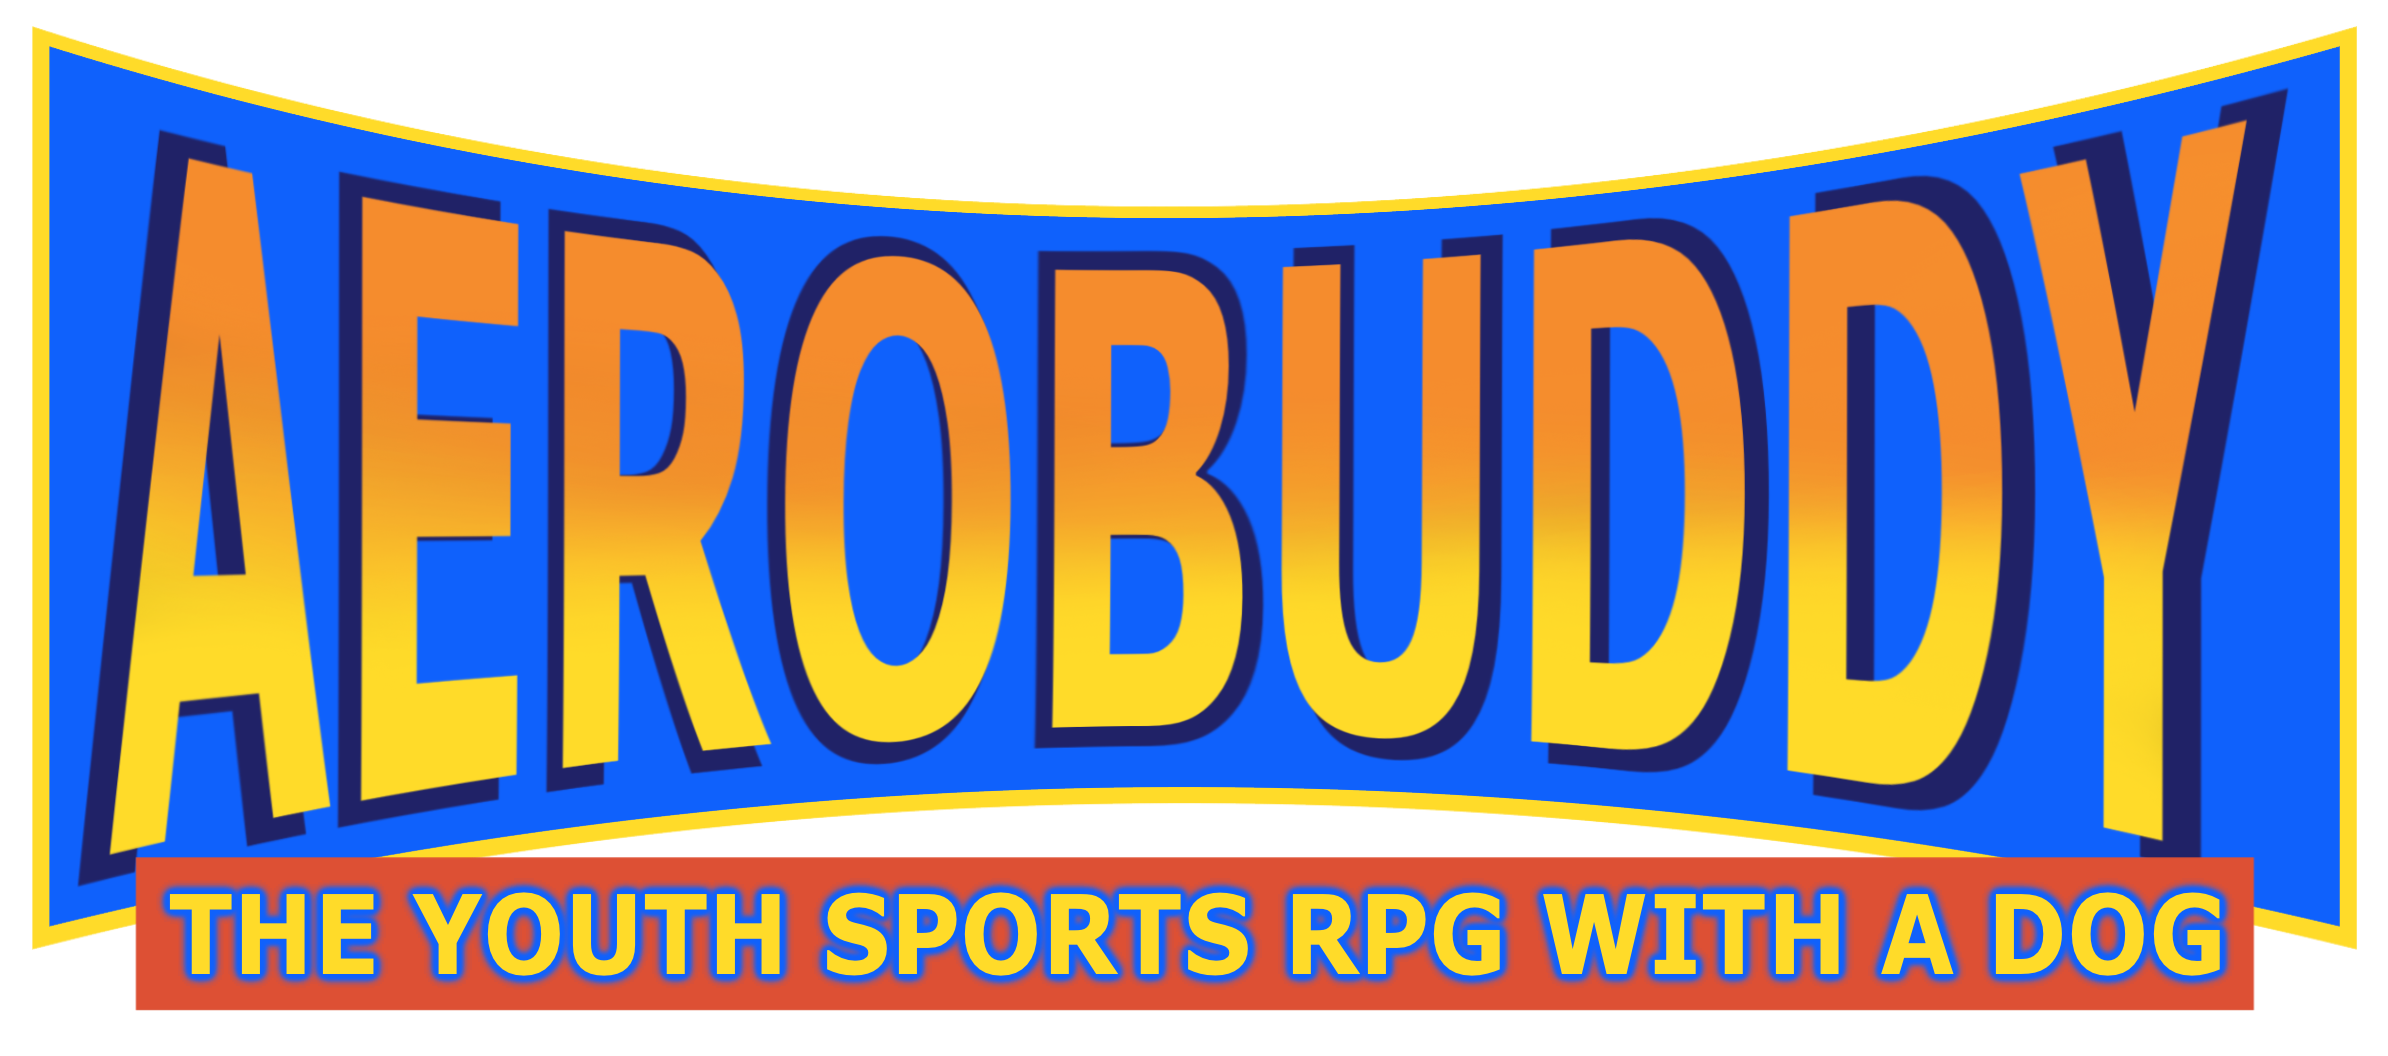 AeroBuddy: The Youth Sports RPG with a Dog